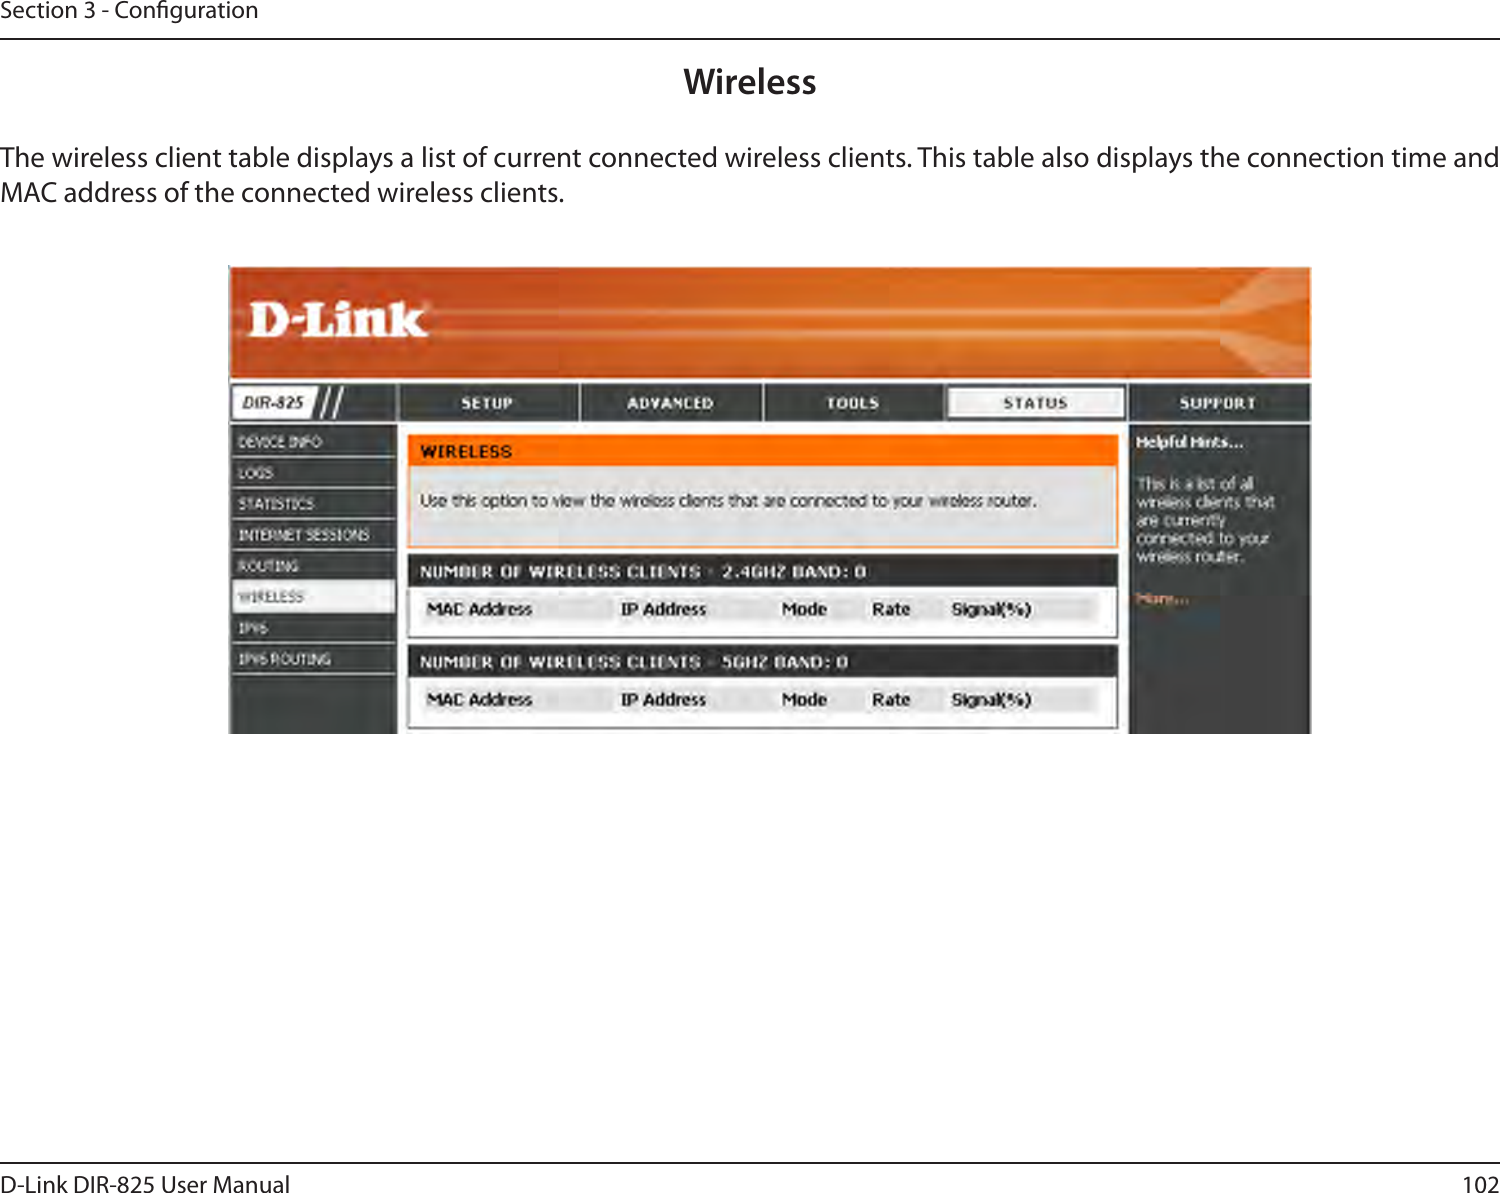 102D-Link DIR-825 User ManualSection 3 - CongurationThe wireless client table displays a list of current connected wireless clients. This table also displays the connection time and MAC address of the connected wireless clients.Wireless